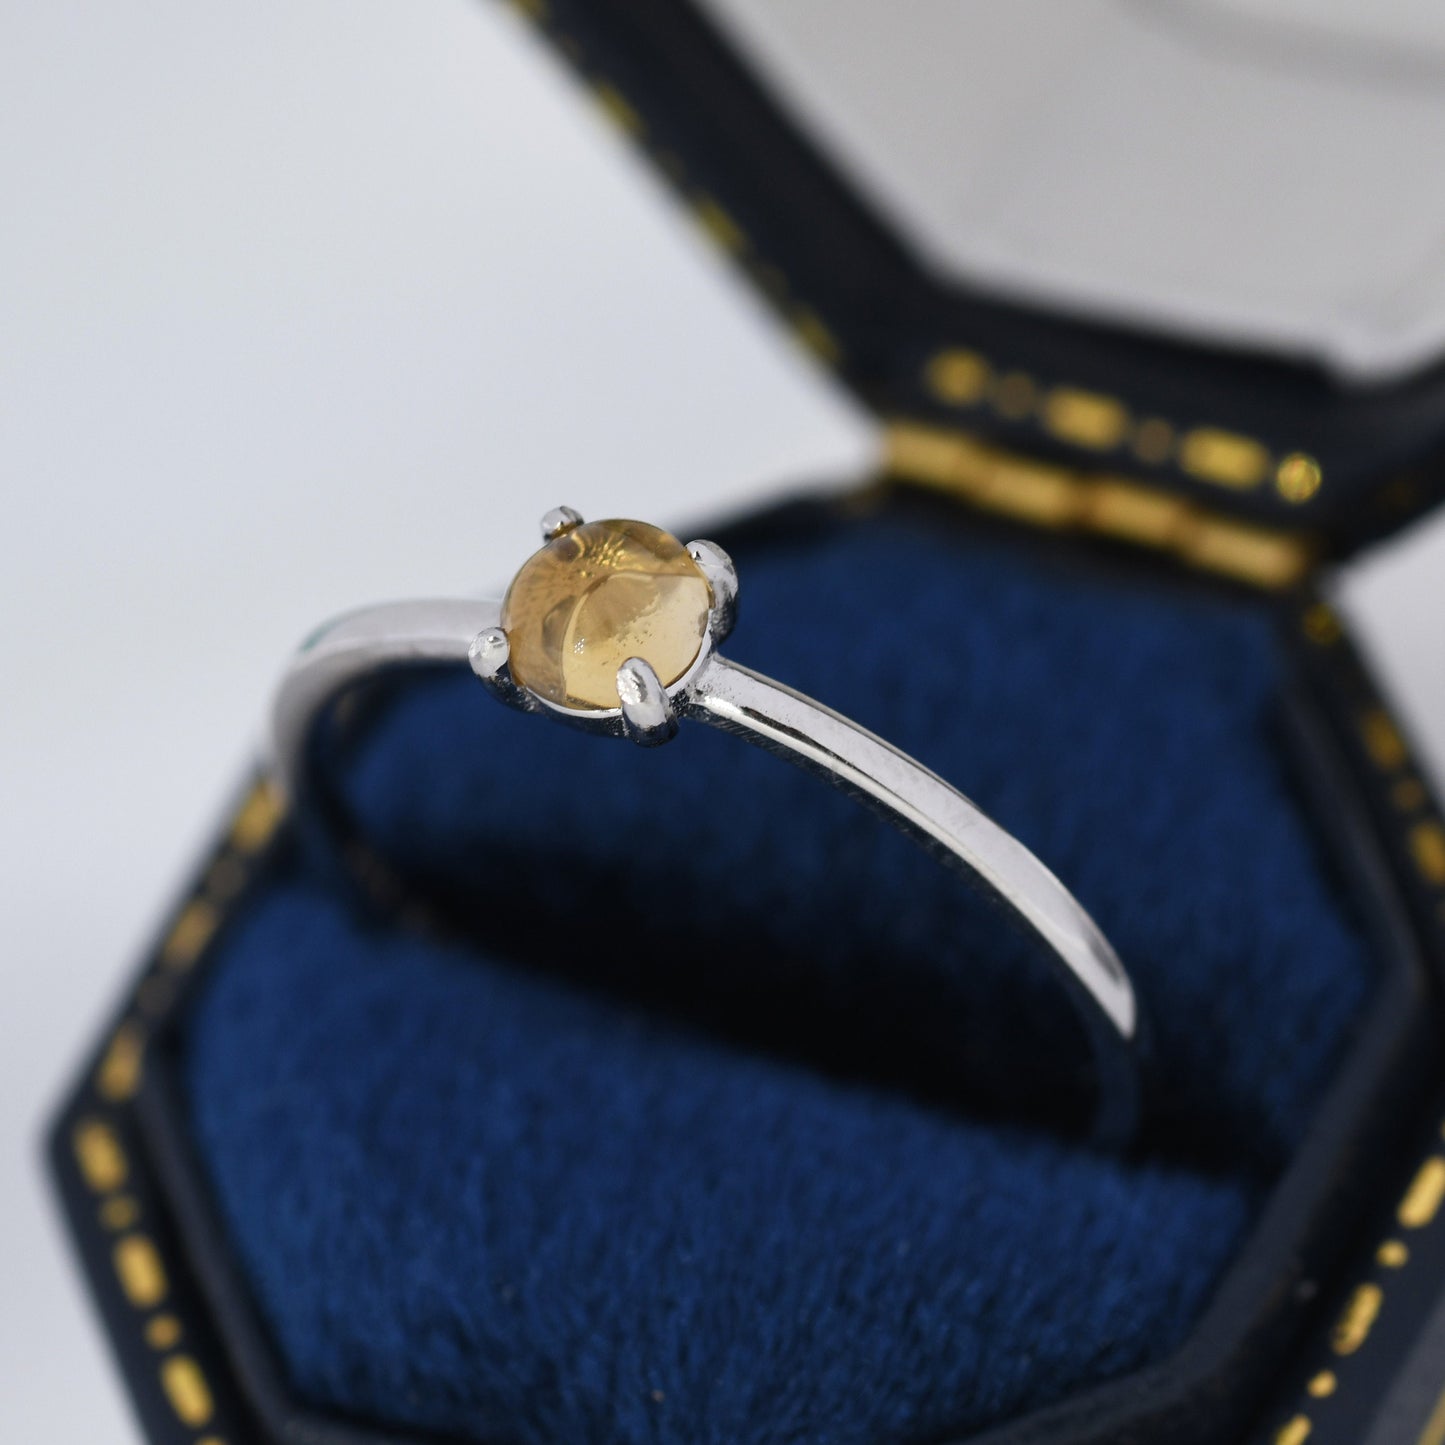 Genuine Citrine Crystal Ring in Sterling Silver, US 5 - 8, Natural Yellow Citrine Ring, November Birthstone Ring